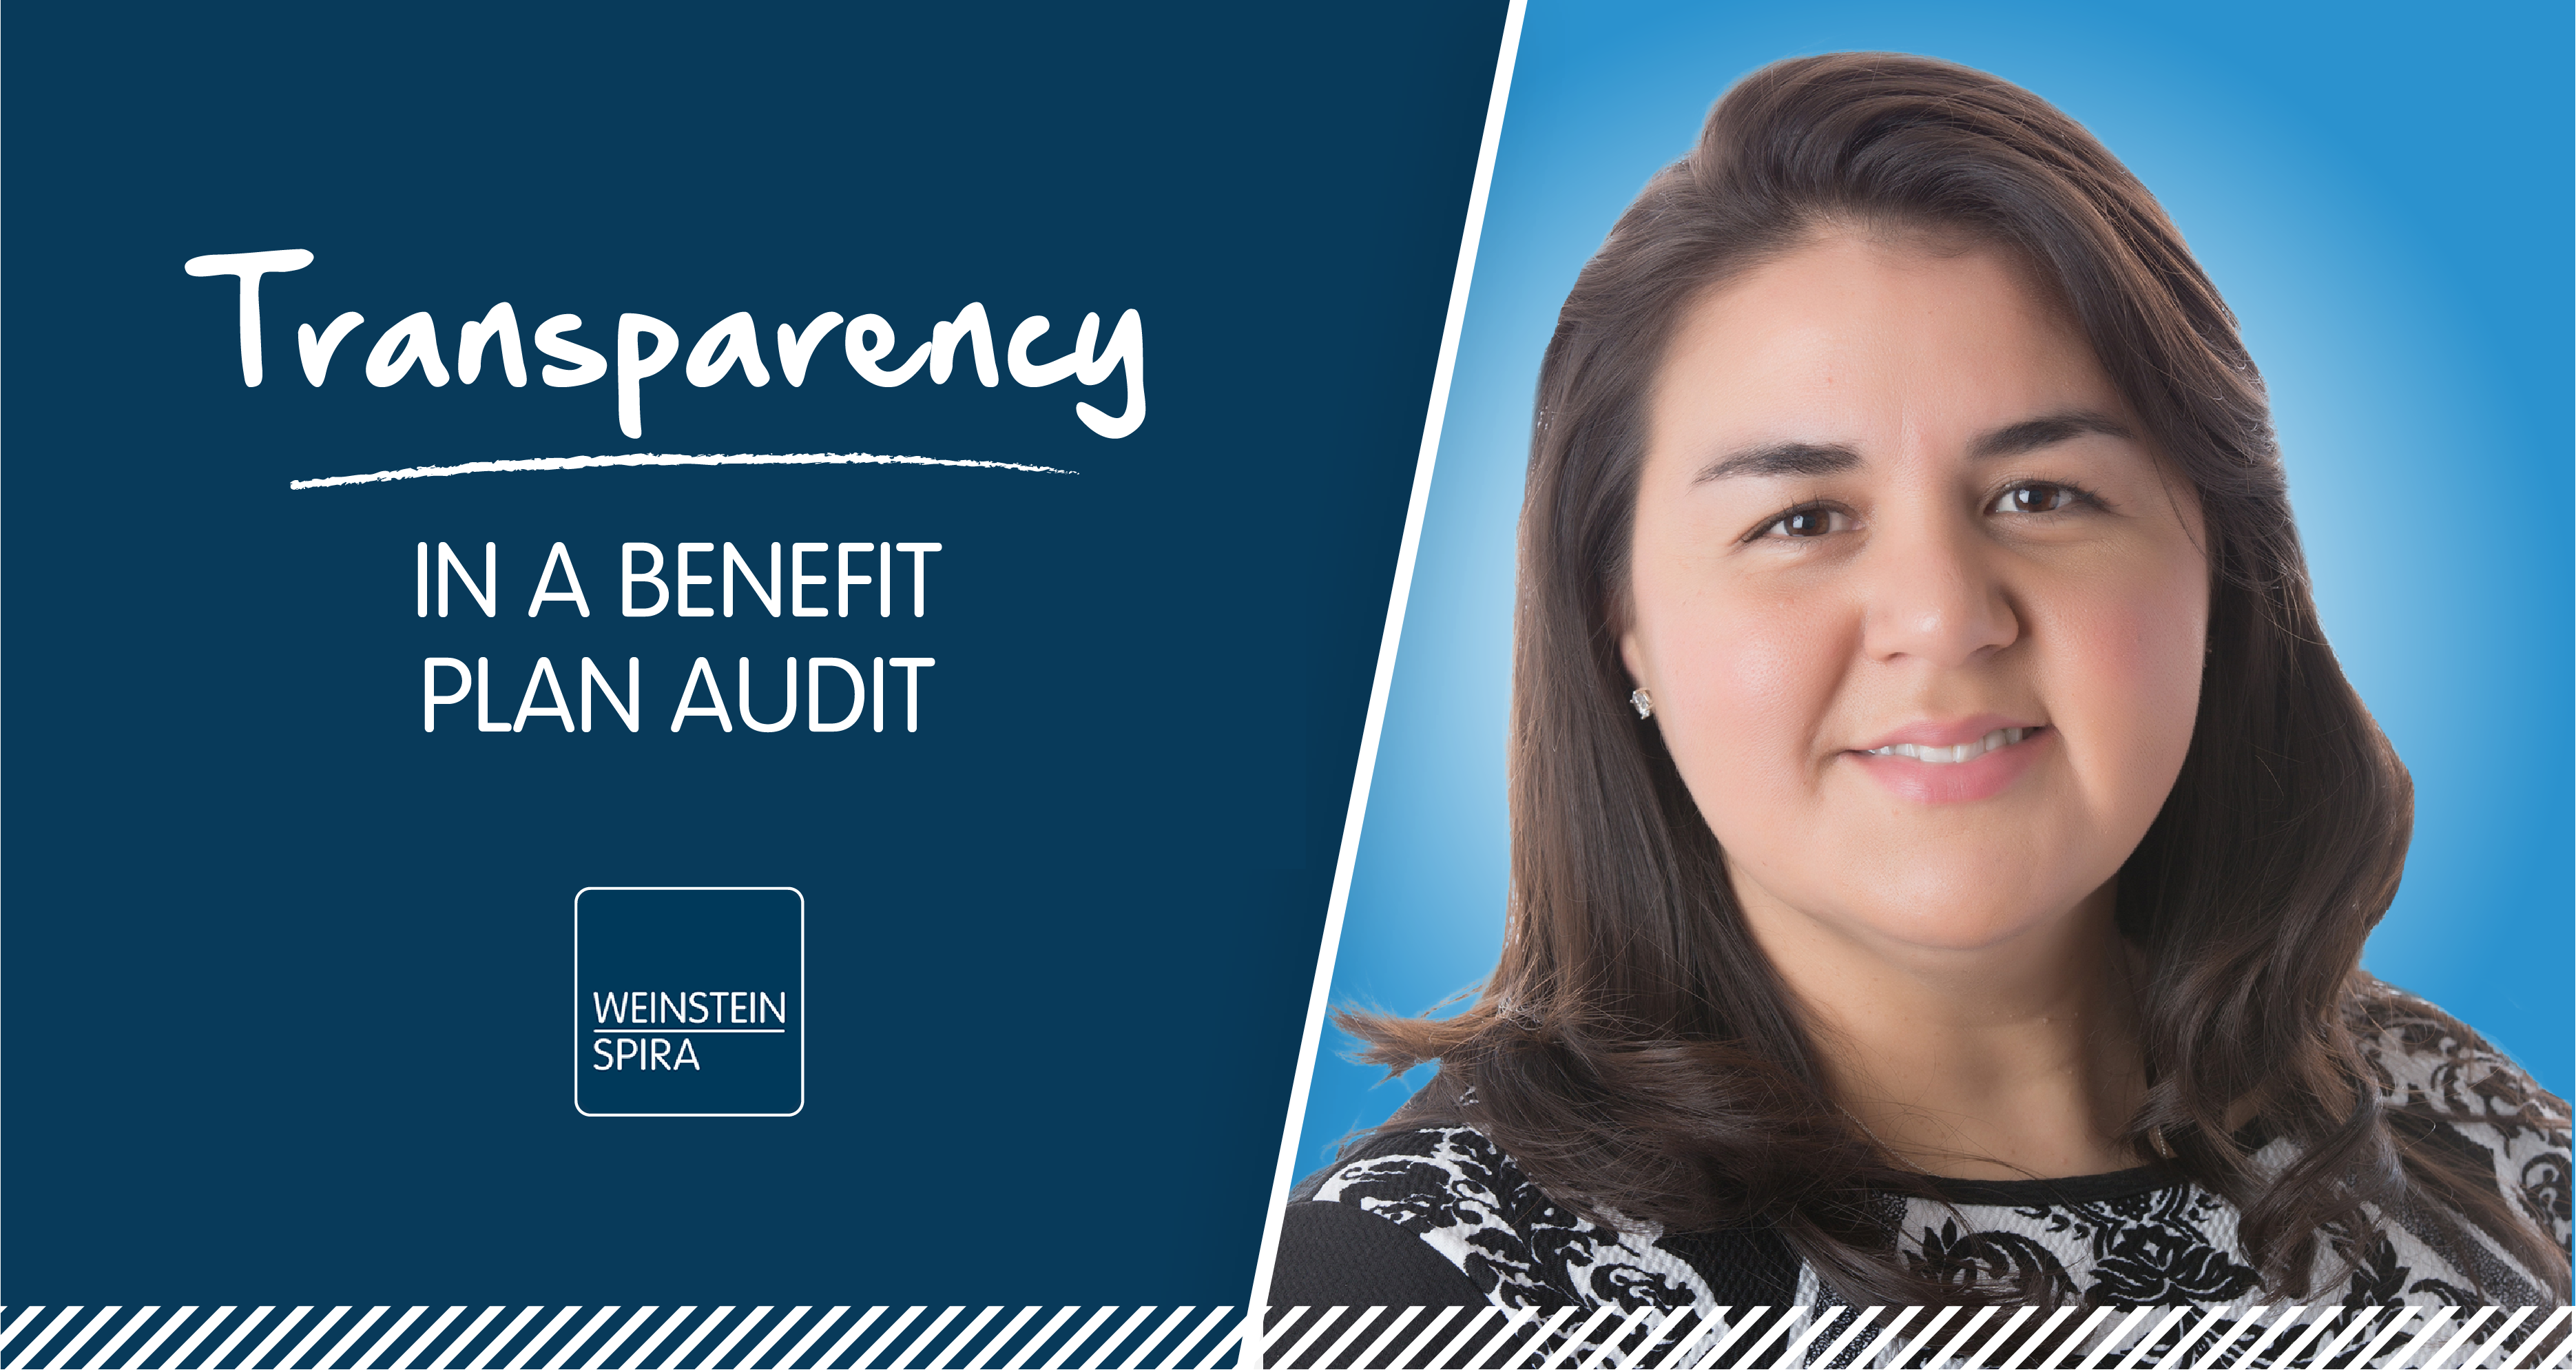 Creating Transparency in a Benefit Plan Audit